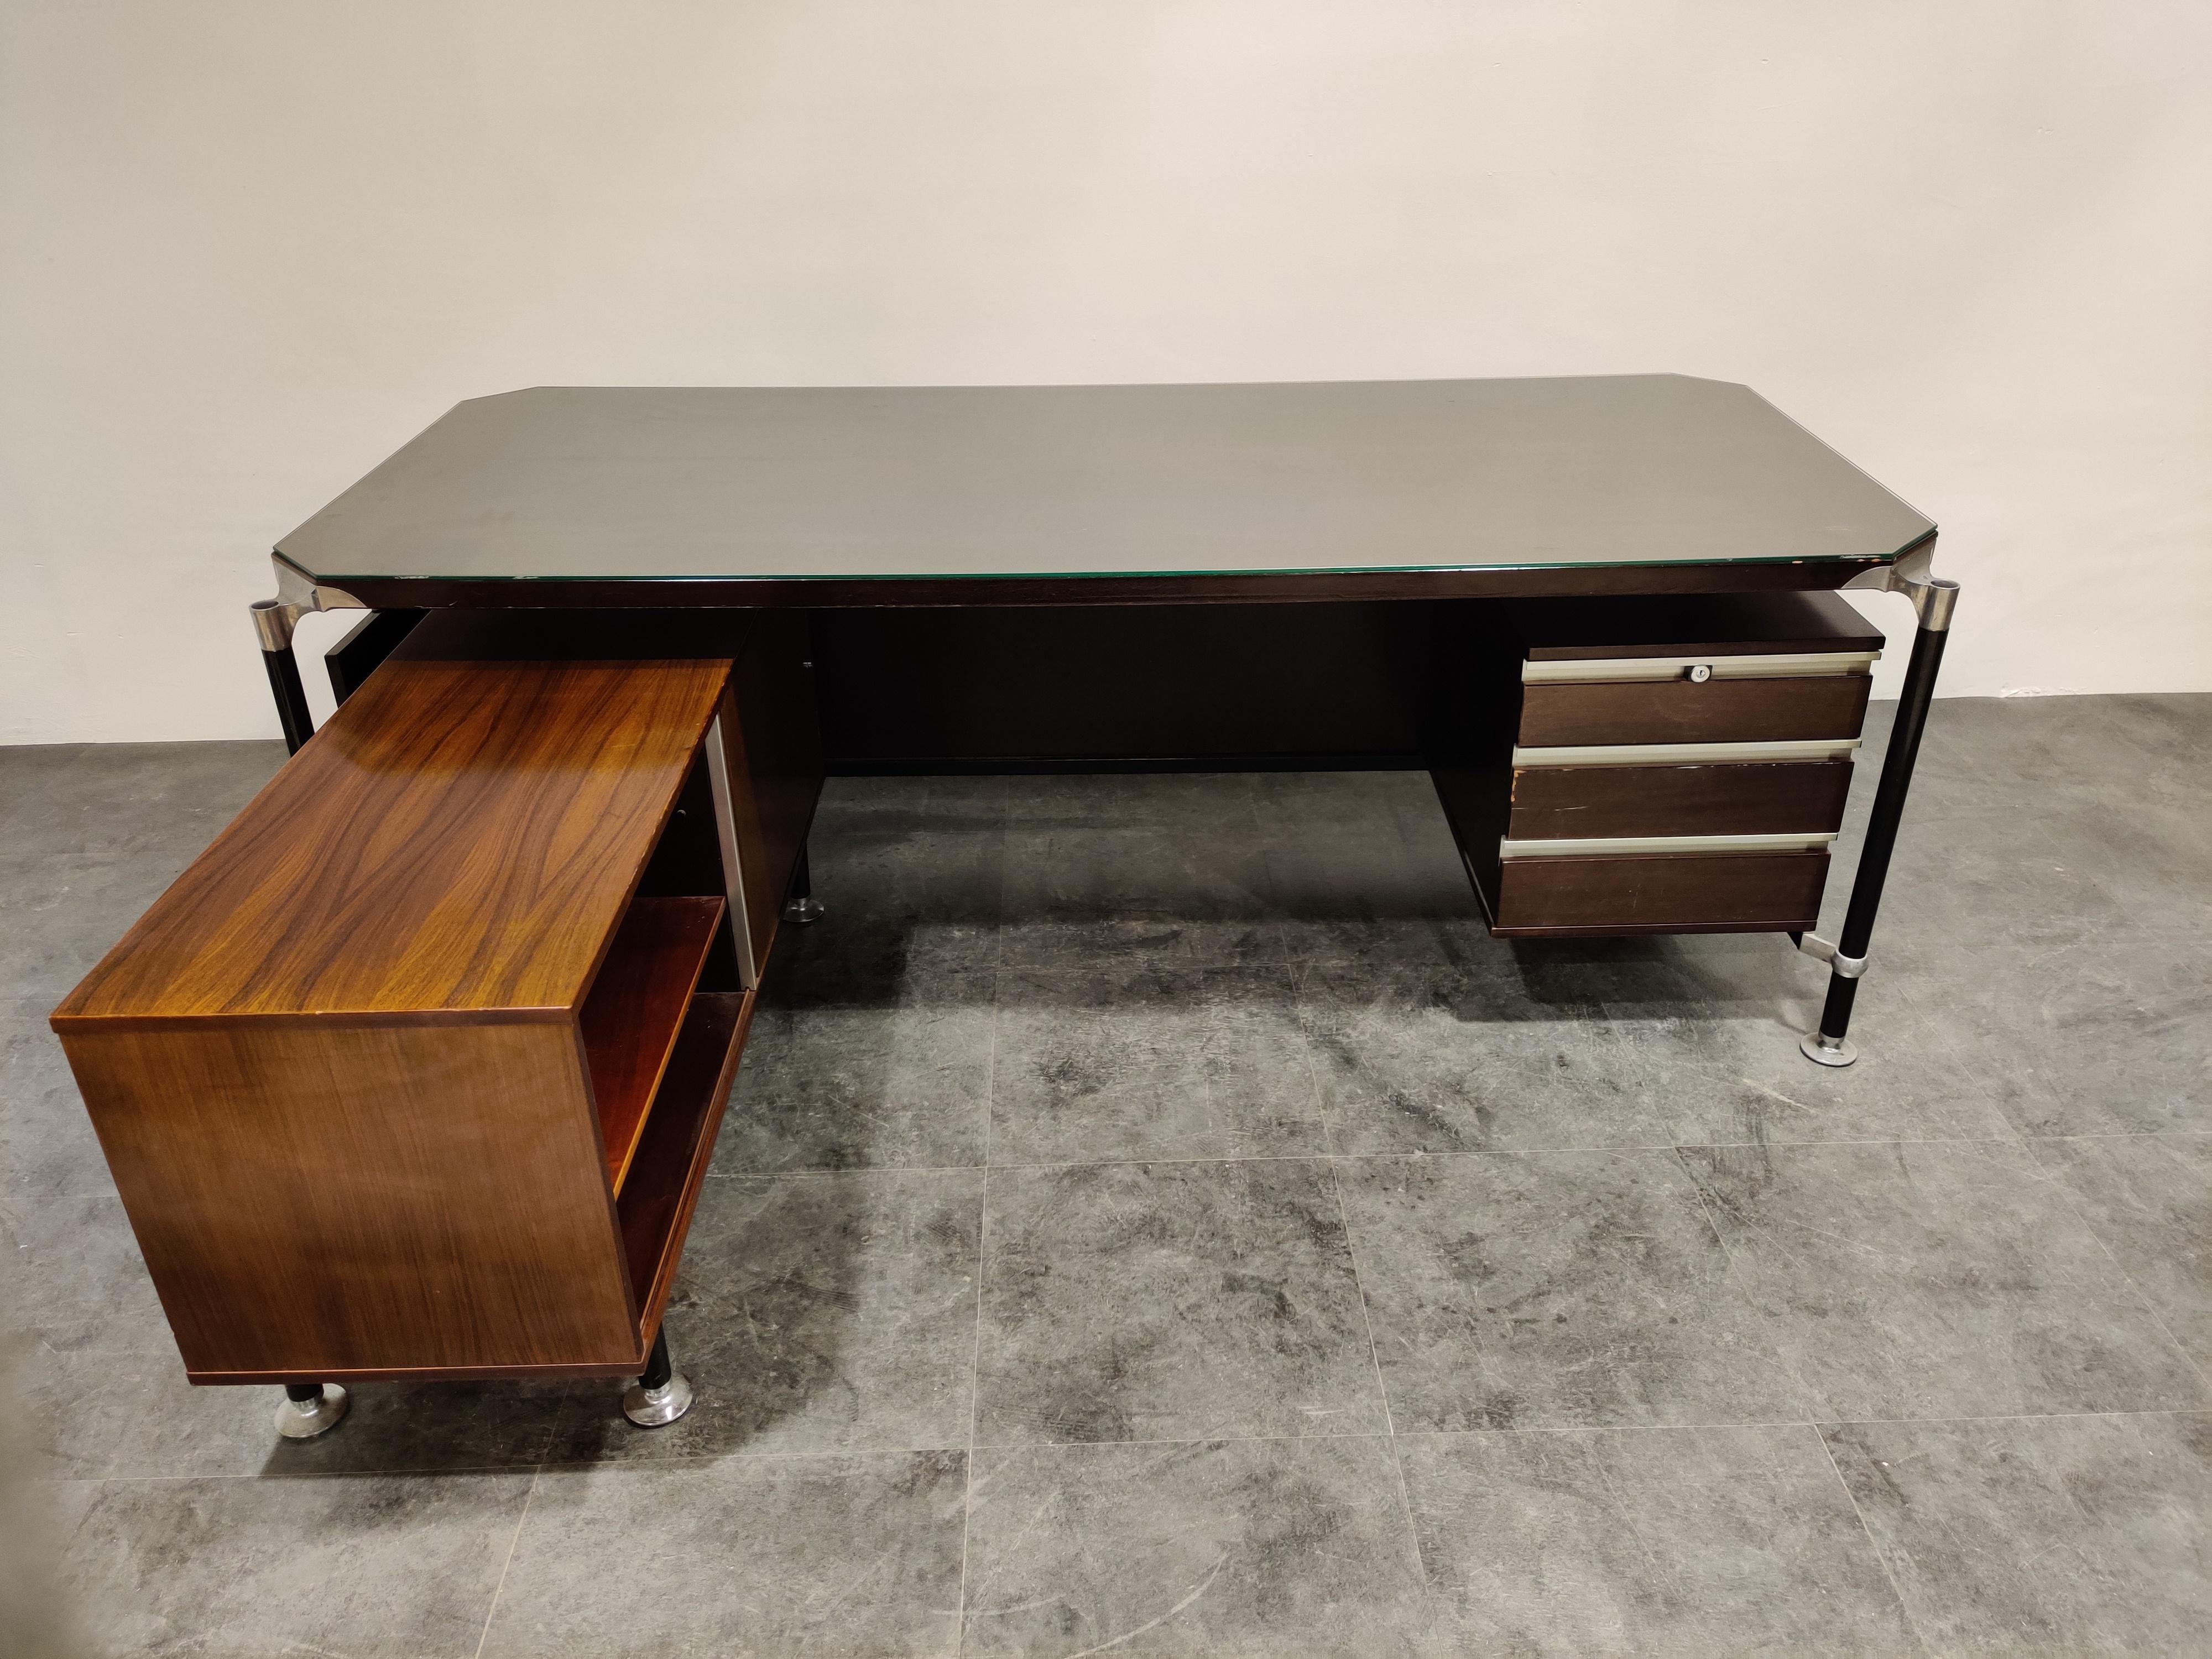 Stunning midcentury desk designed by famous Italian designer couple Ico and Luisa Paris for M.I.M. Roma.

The desk is made of steel, with rosewood and a glass top. The glass top is non original and can be discarted if desired.

The desk is in